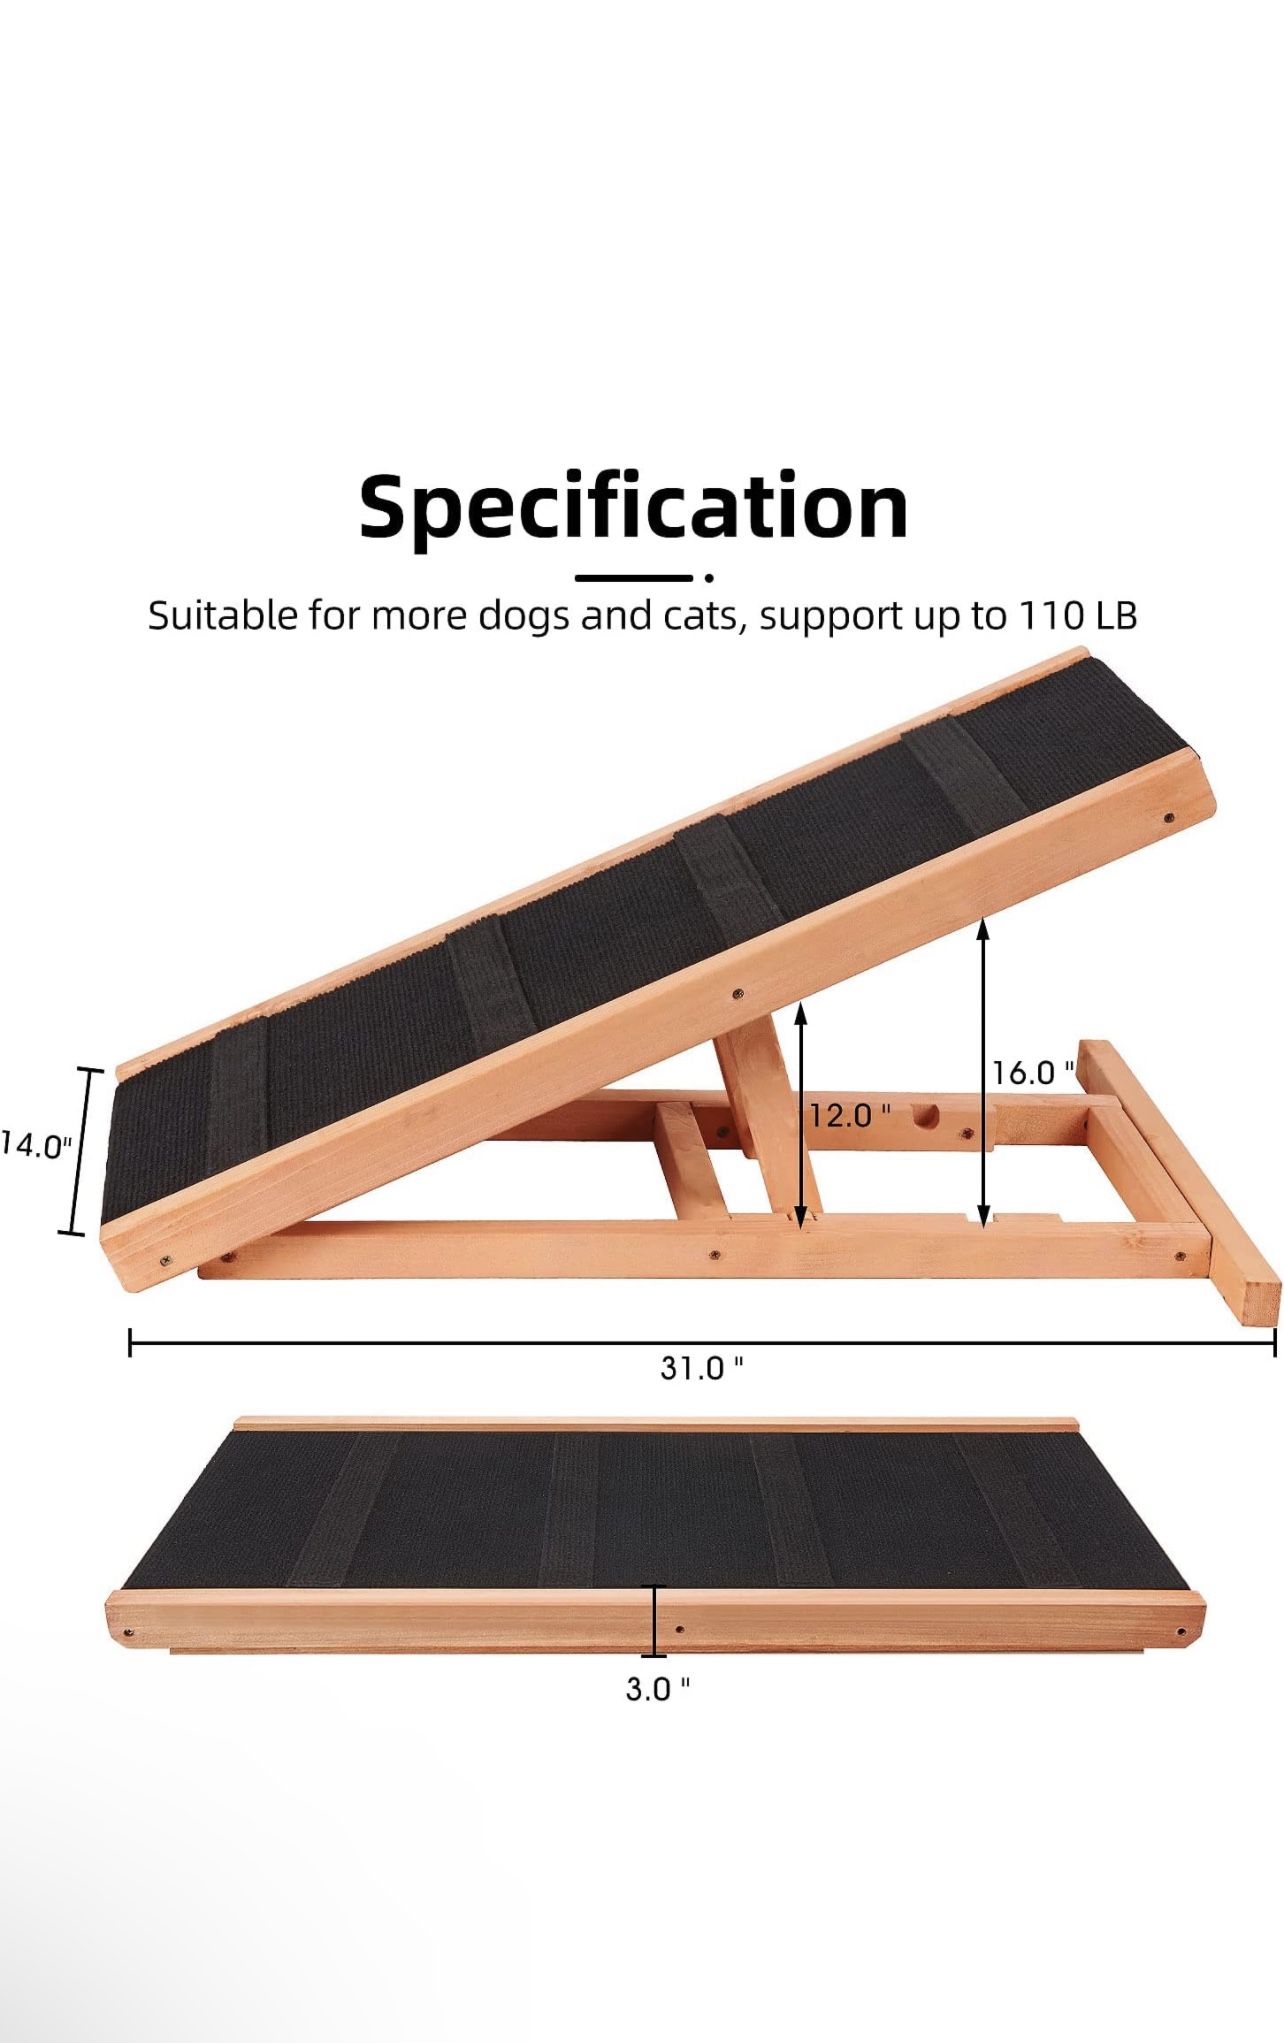 Wooden Height Adjustable Pet Ramp for Dogs and Cats, 2 Layers from 12 - 16 inch with Non Slip Carpet Surface and 4 Self-Adhesive Anti-Skid Mat, Foldab